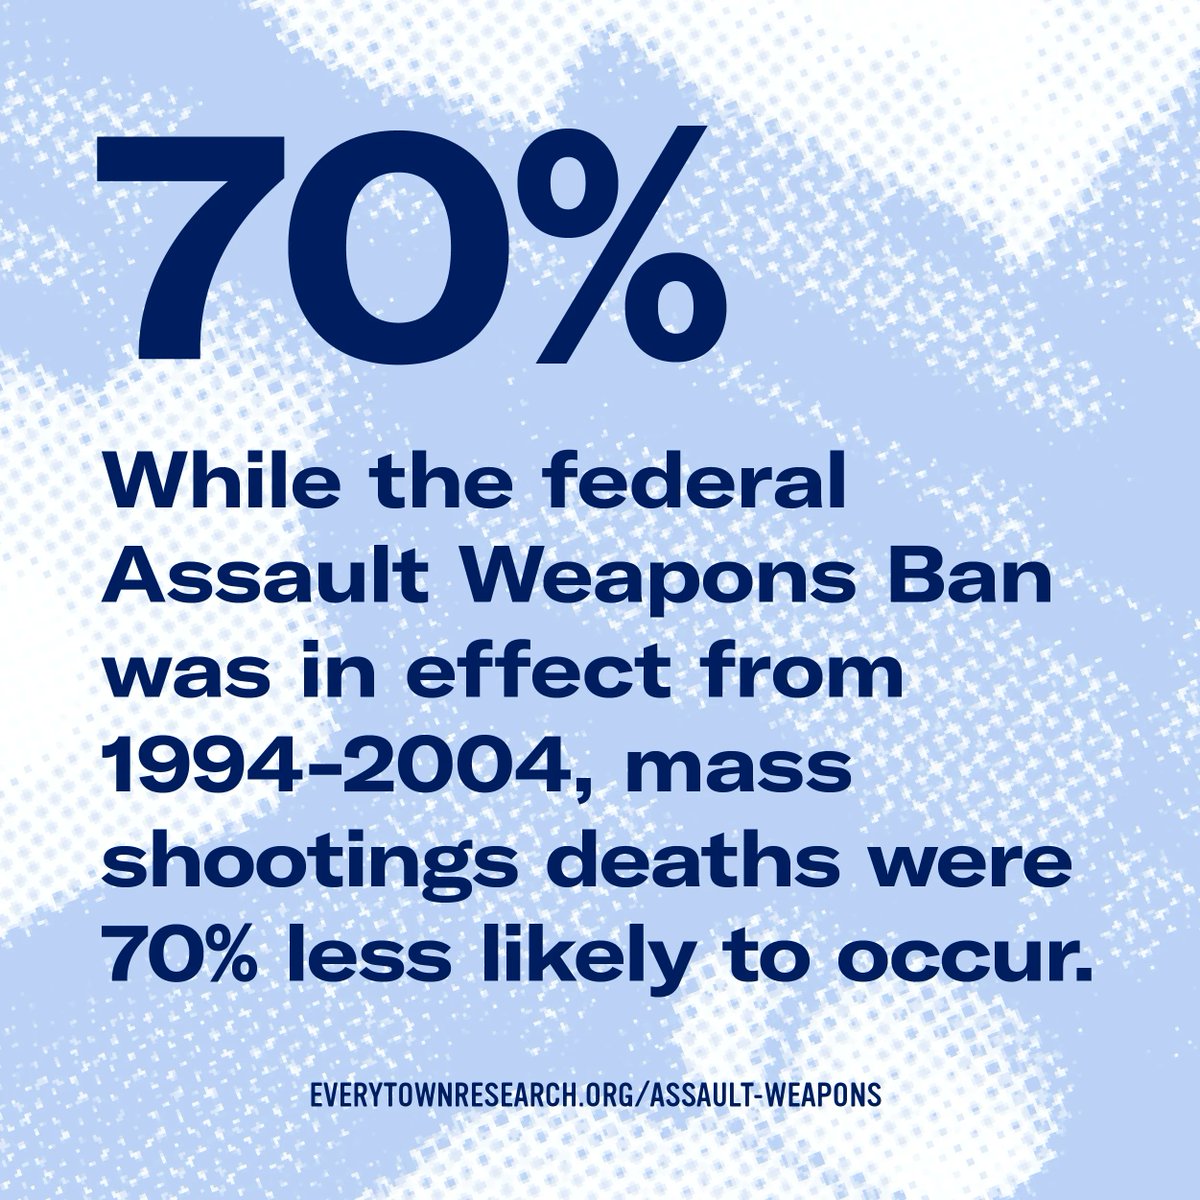 The assault weapons ban worked before, it can work again!

Text FED UP to 644-33 to tell your US House rep to reinstate the bipartisan assault weapons ban and save lives. #FedUp